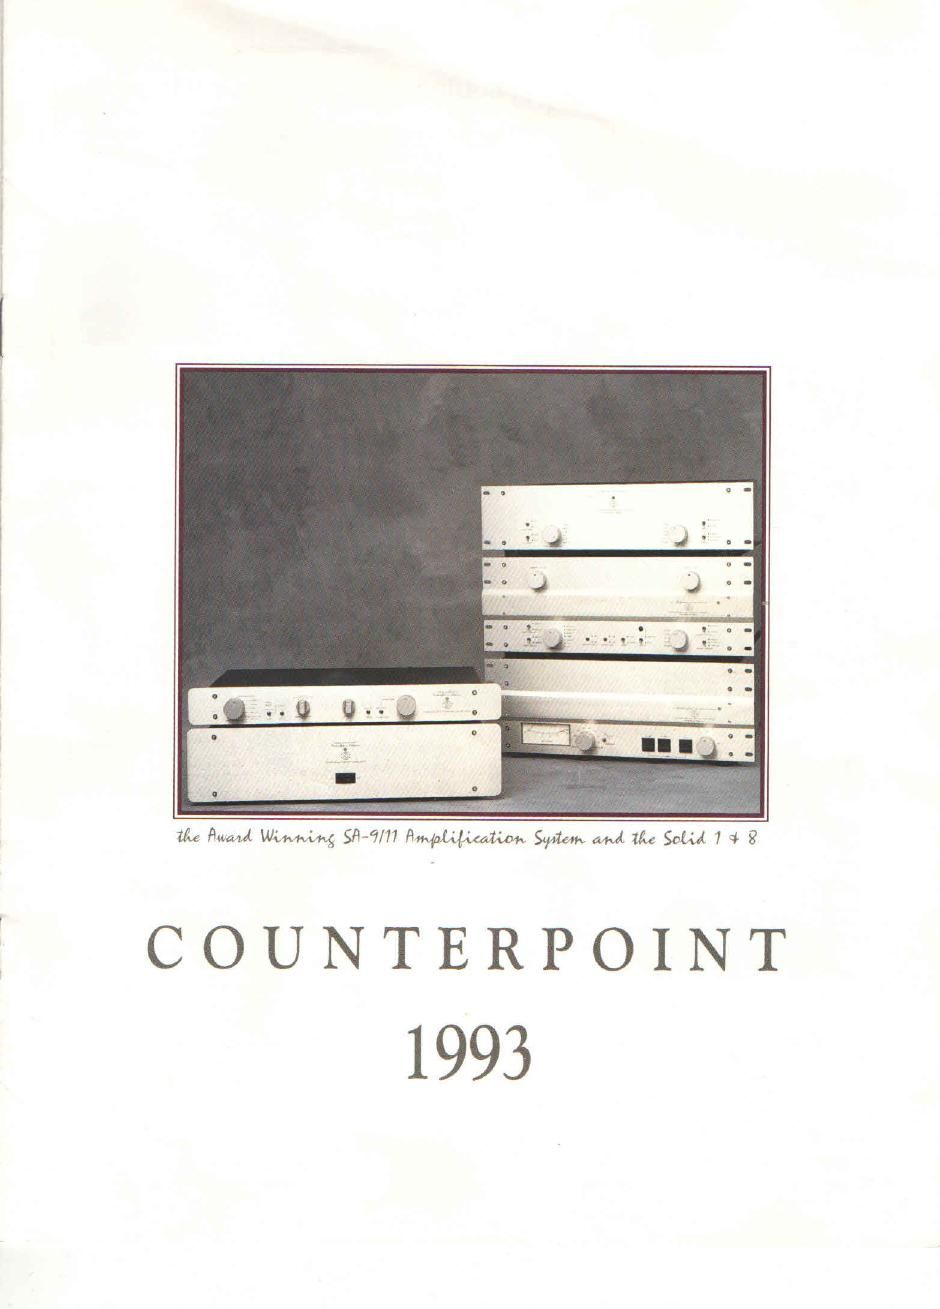 1993 Counterpoint Catalog